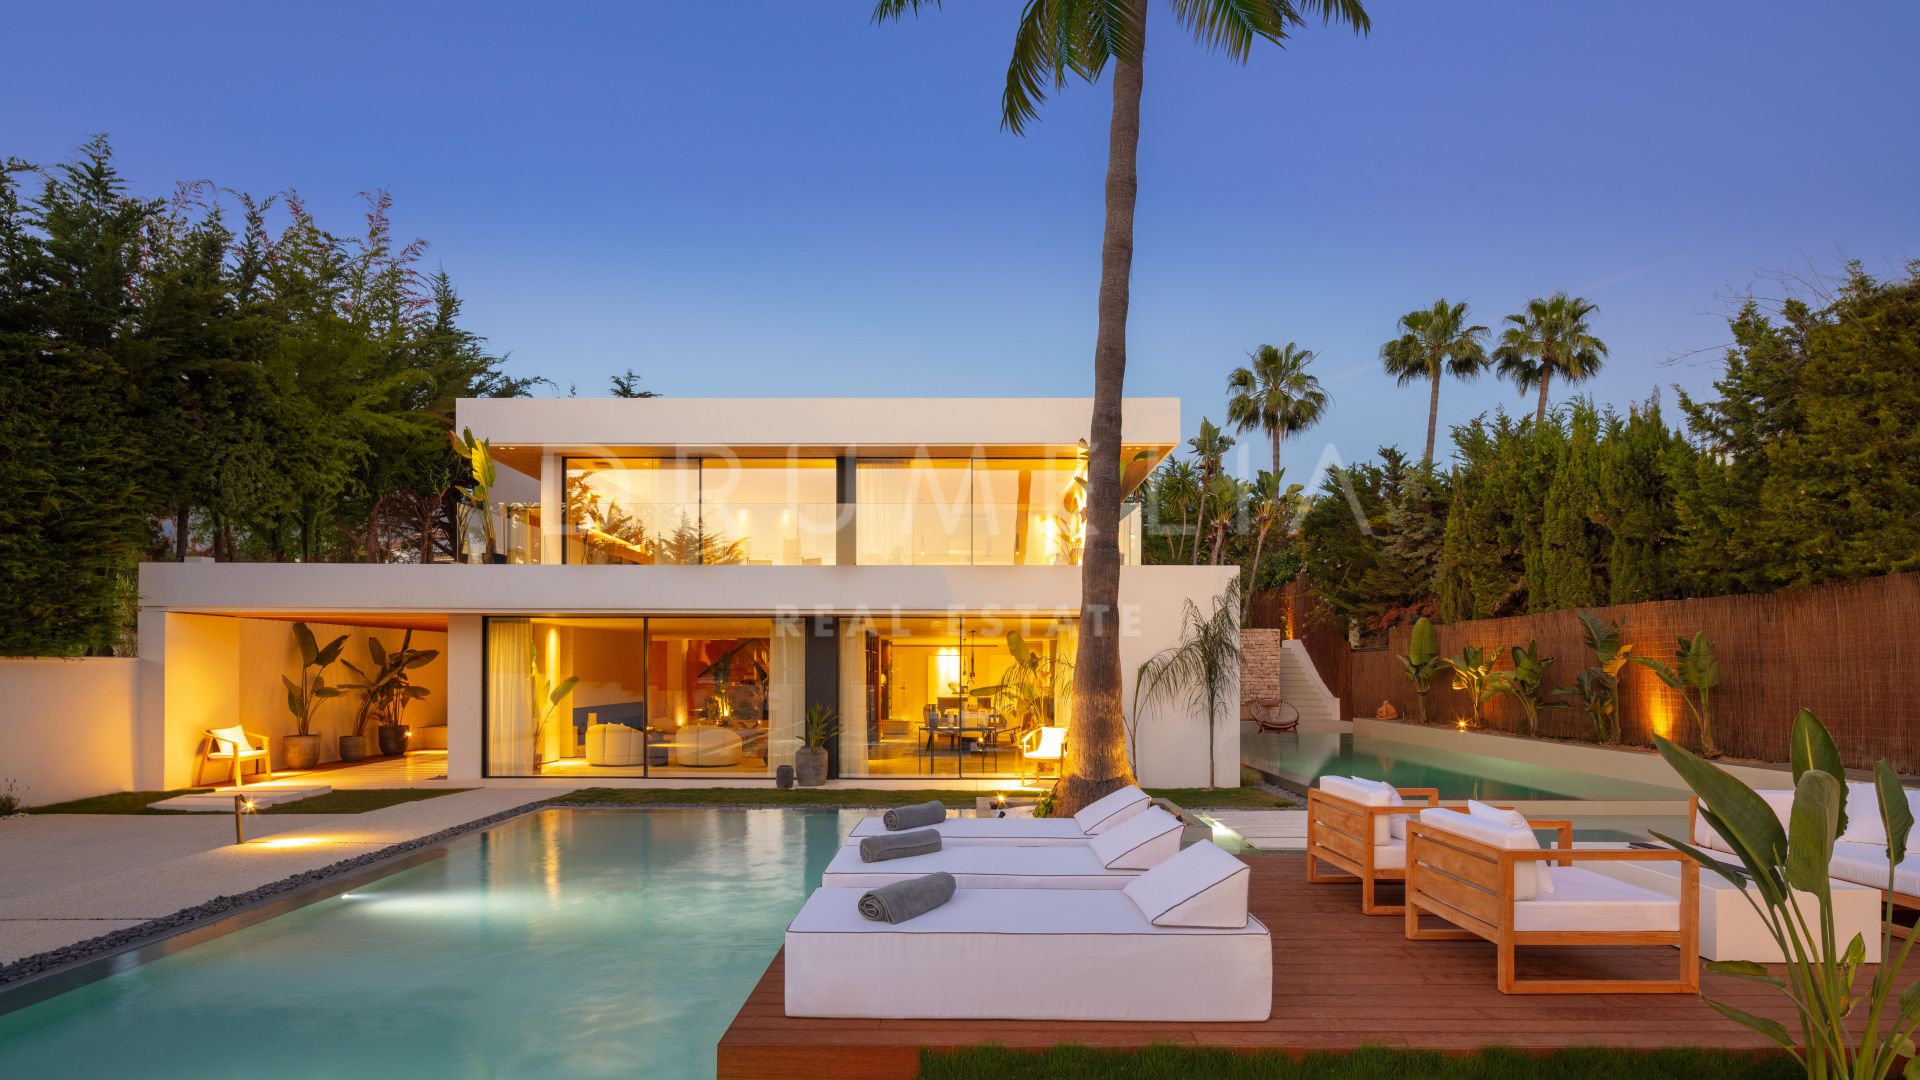 Exquisitely presented modern luxury villa in the heart of Nueva Andalucia, Marbella